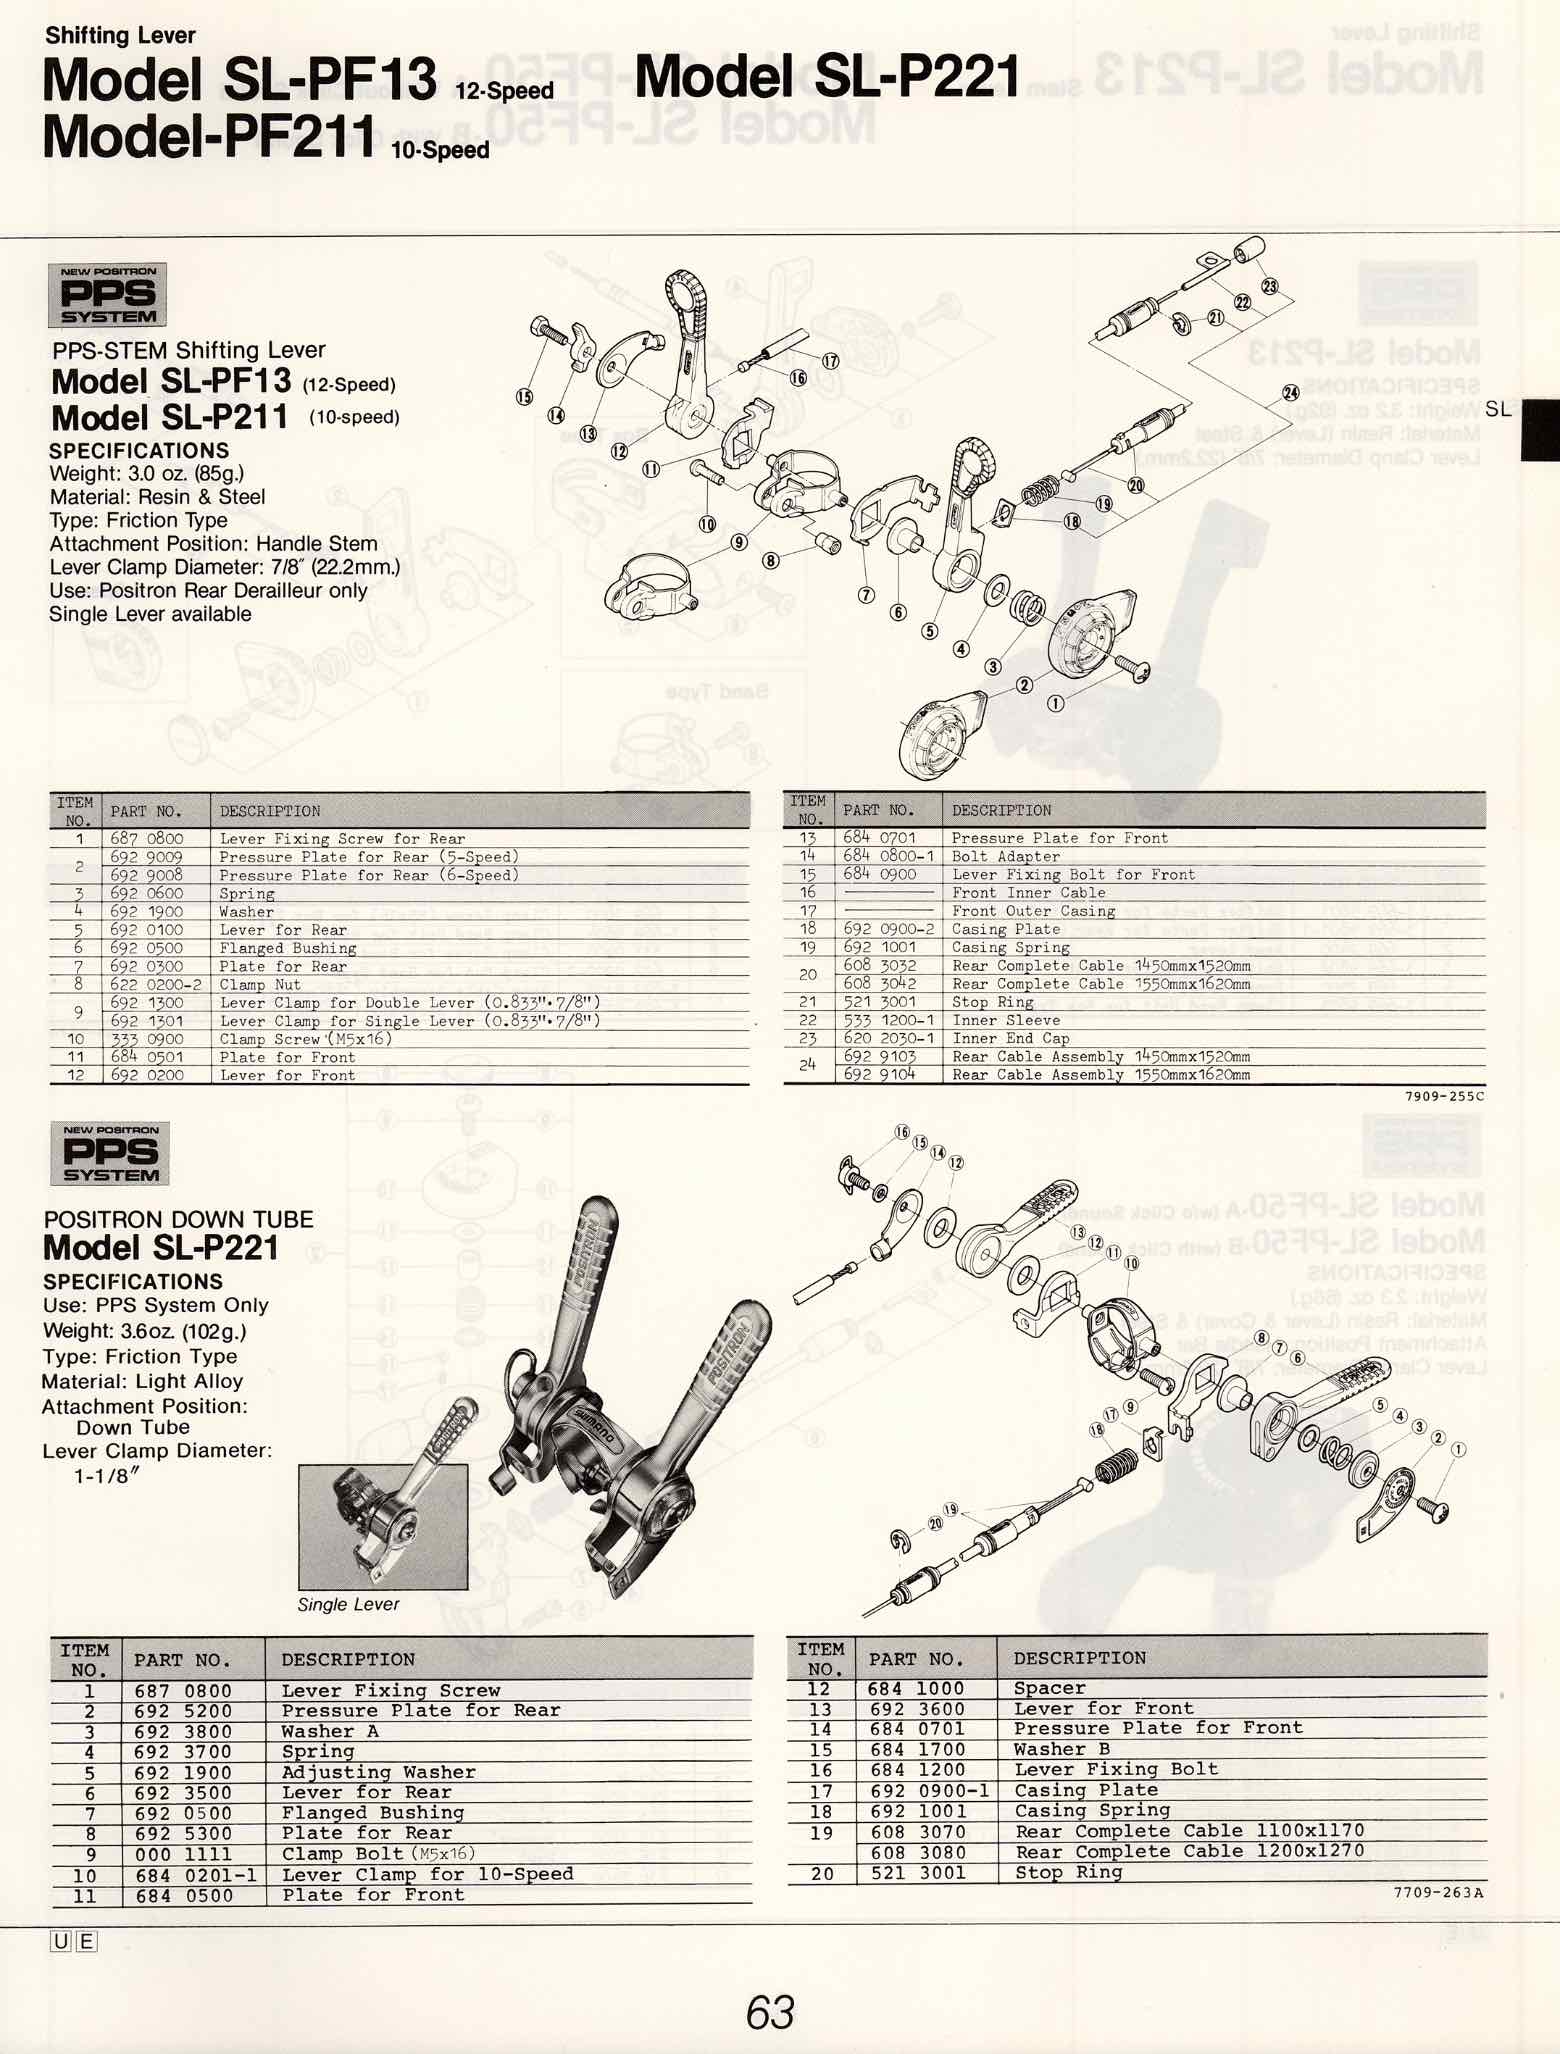 Shimano Bicycle System Components (1984) page 63 main image